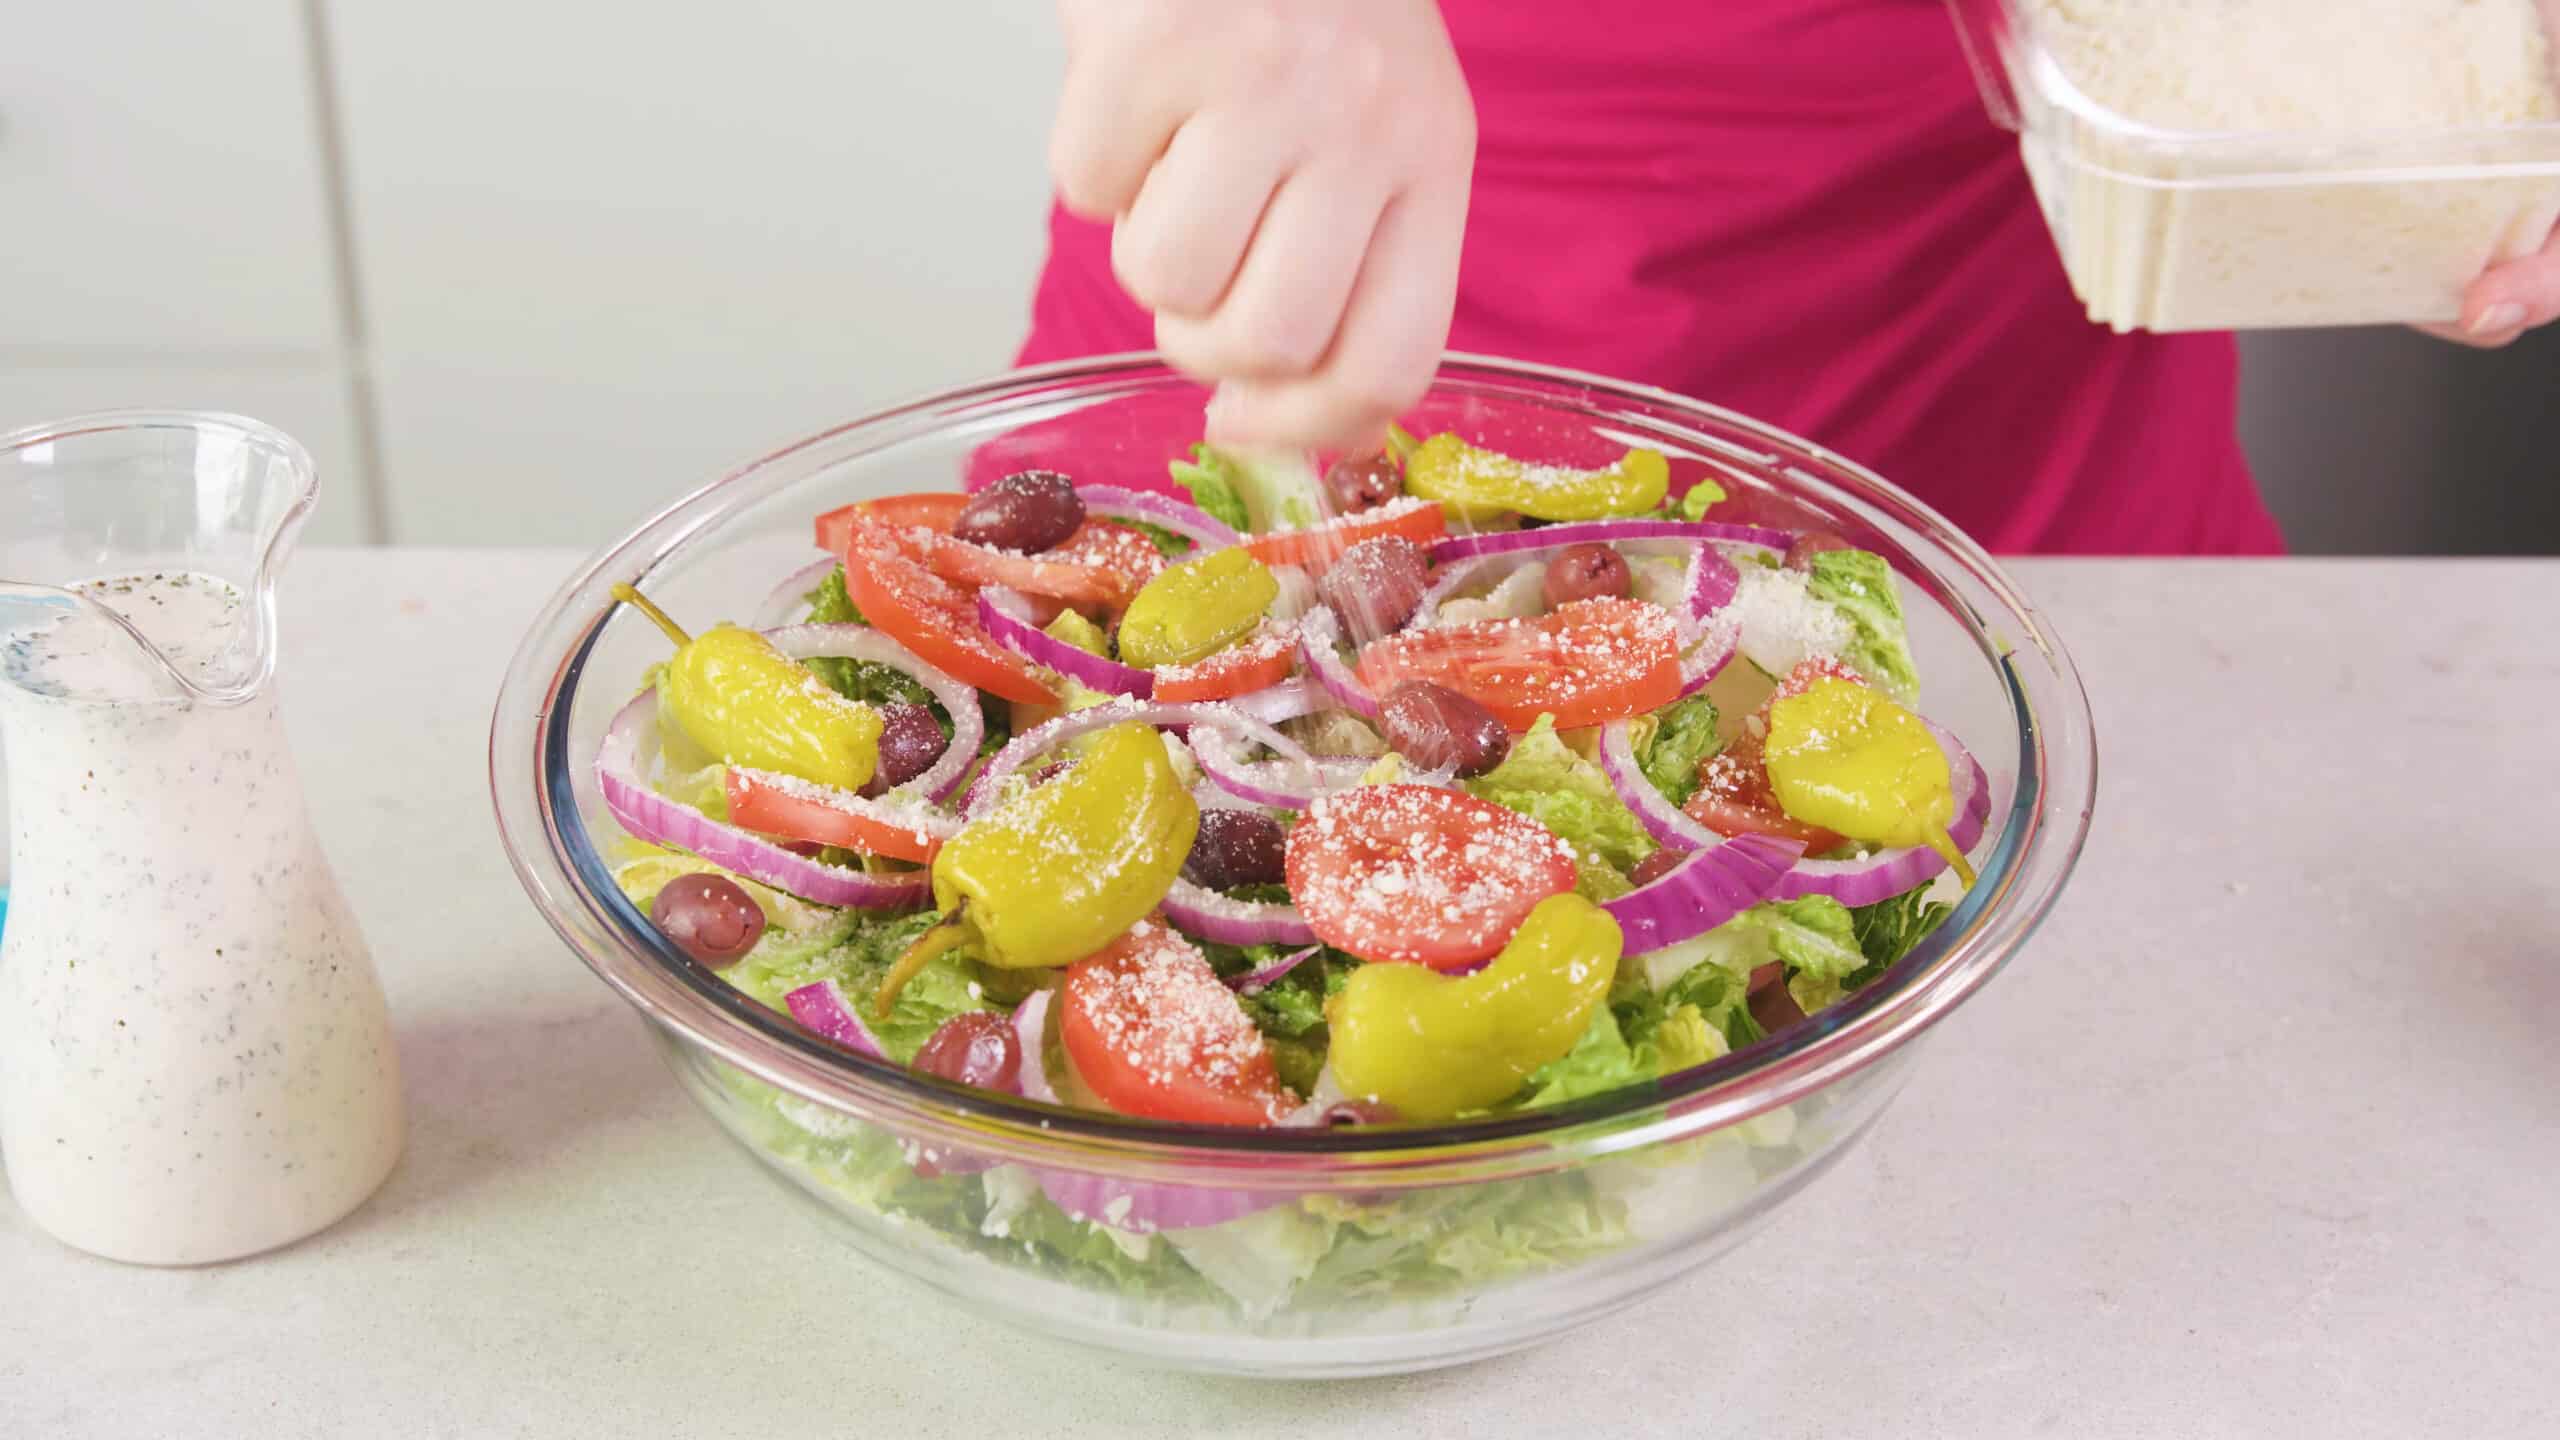 Angled view of a large clear glass mixing bowl filled with fresh green salad and being topped with grated parmesan cheese with a pitcher of salad dressing to the side.